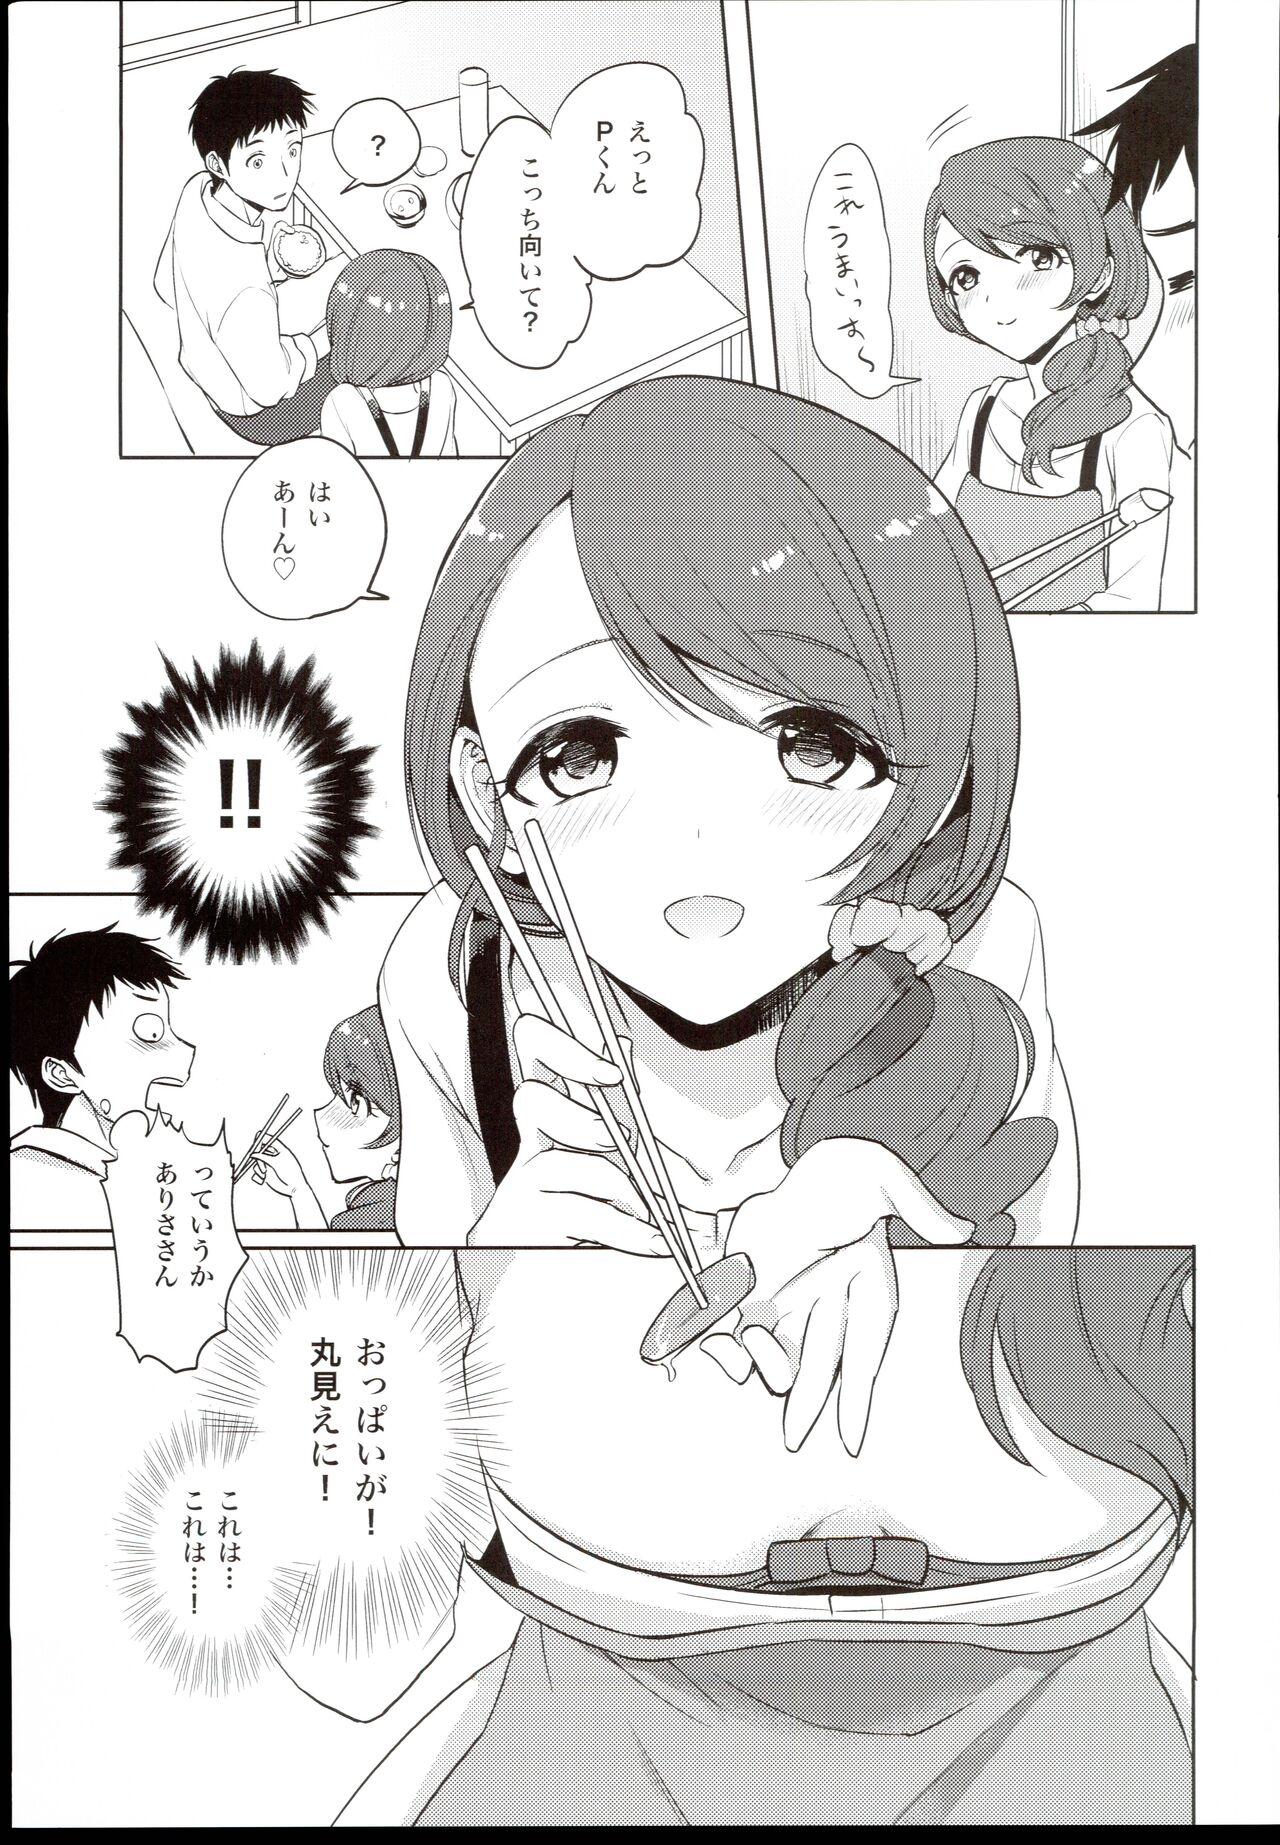 Outside Onegai! Arisa-Tente - The idolmaster Busty - Page 7